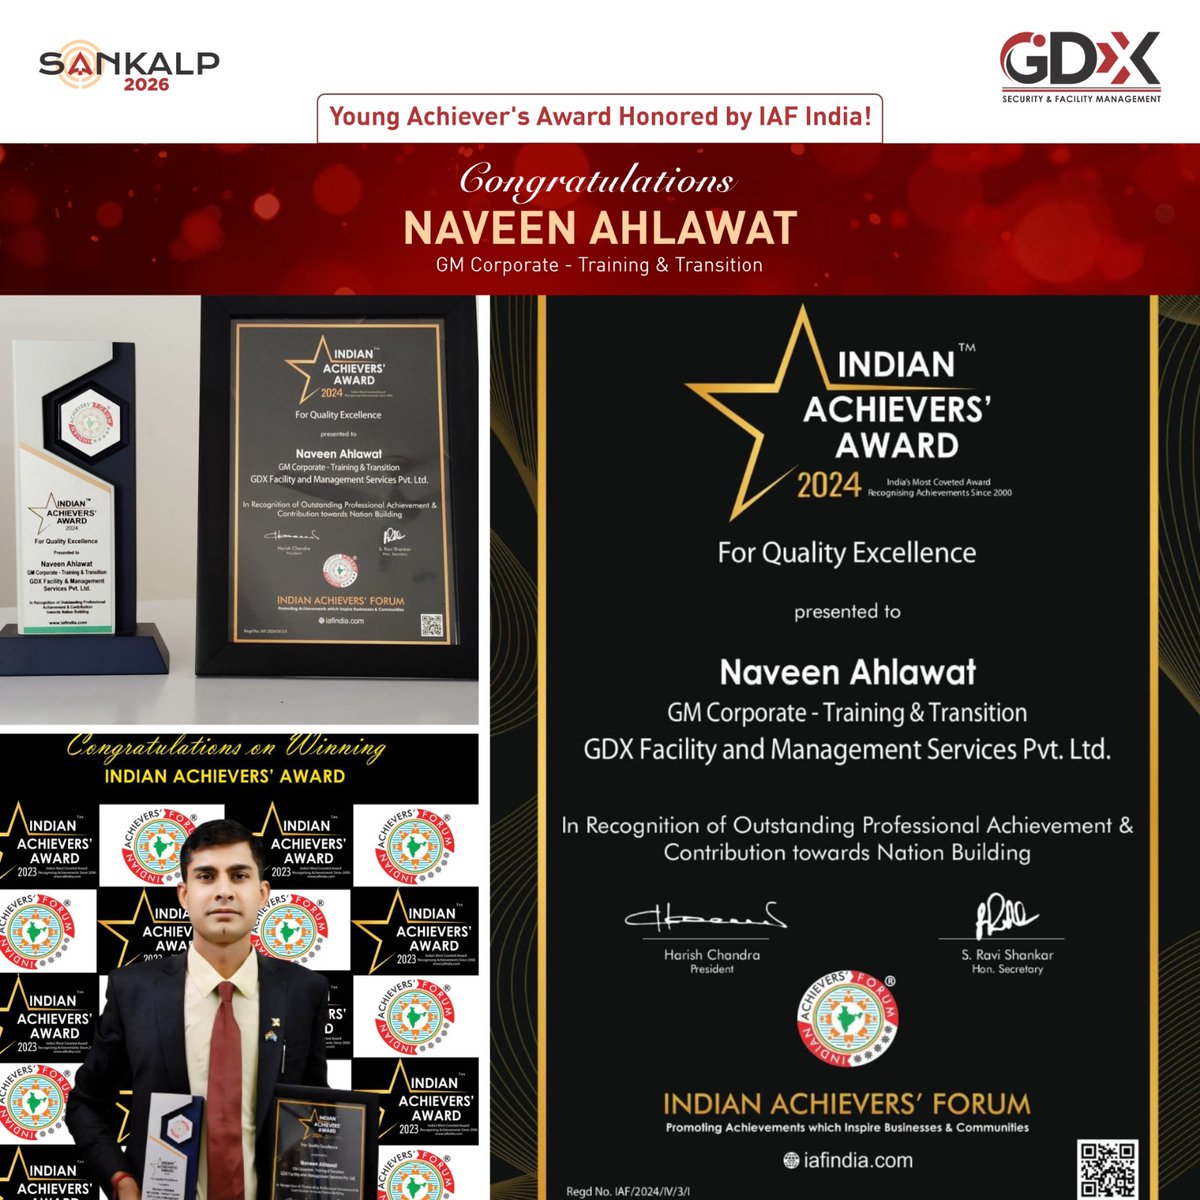 Kudos to Naveen Ahlawat for receiving the Young Achiever's Award from IAF India! His exceptional professional accomplishments and dedication serves as an inspiring example to everyone.

Call us anytime at our 24x7 helpline: 18604191889 #FacilityManagement #SecurityManagement